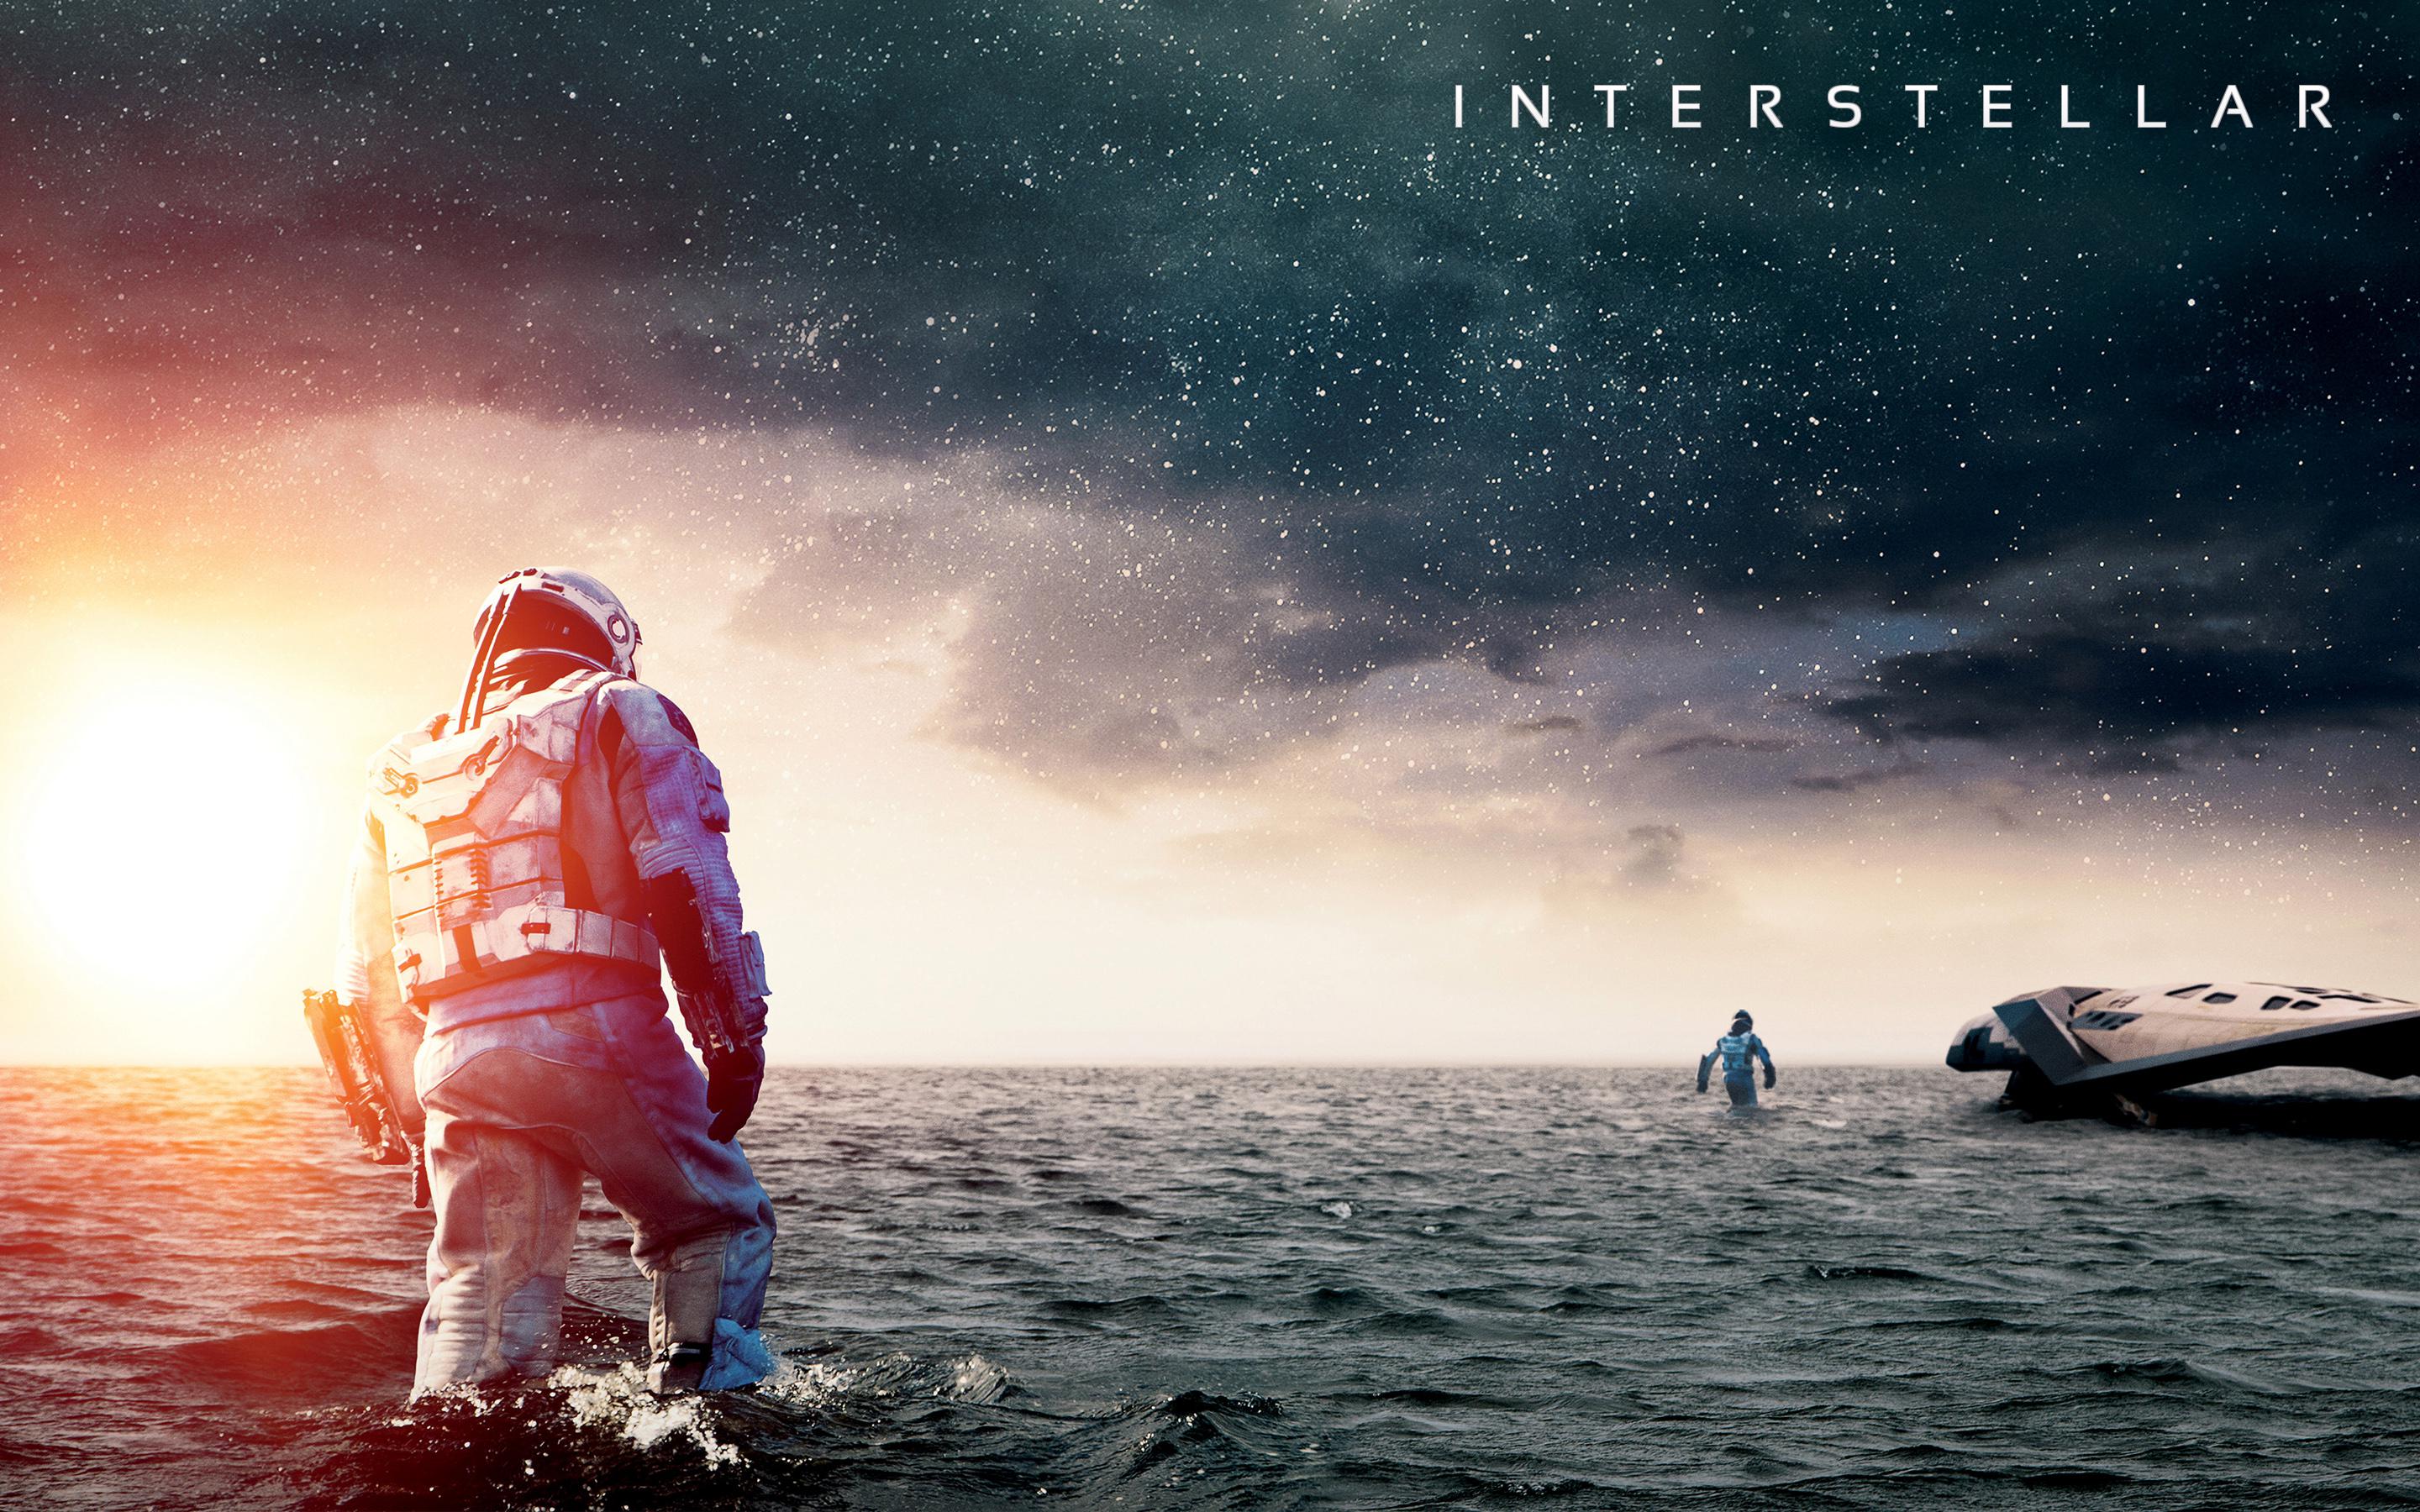 Interstellar 4K wallpapers for your